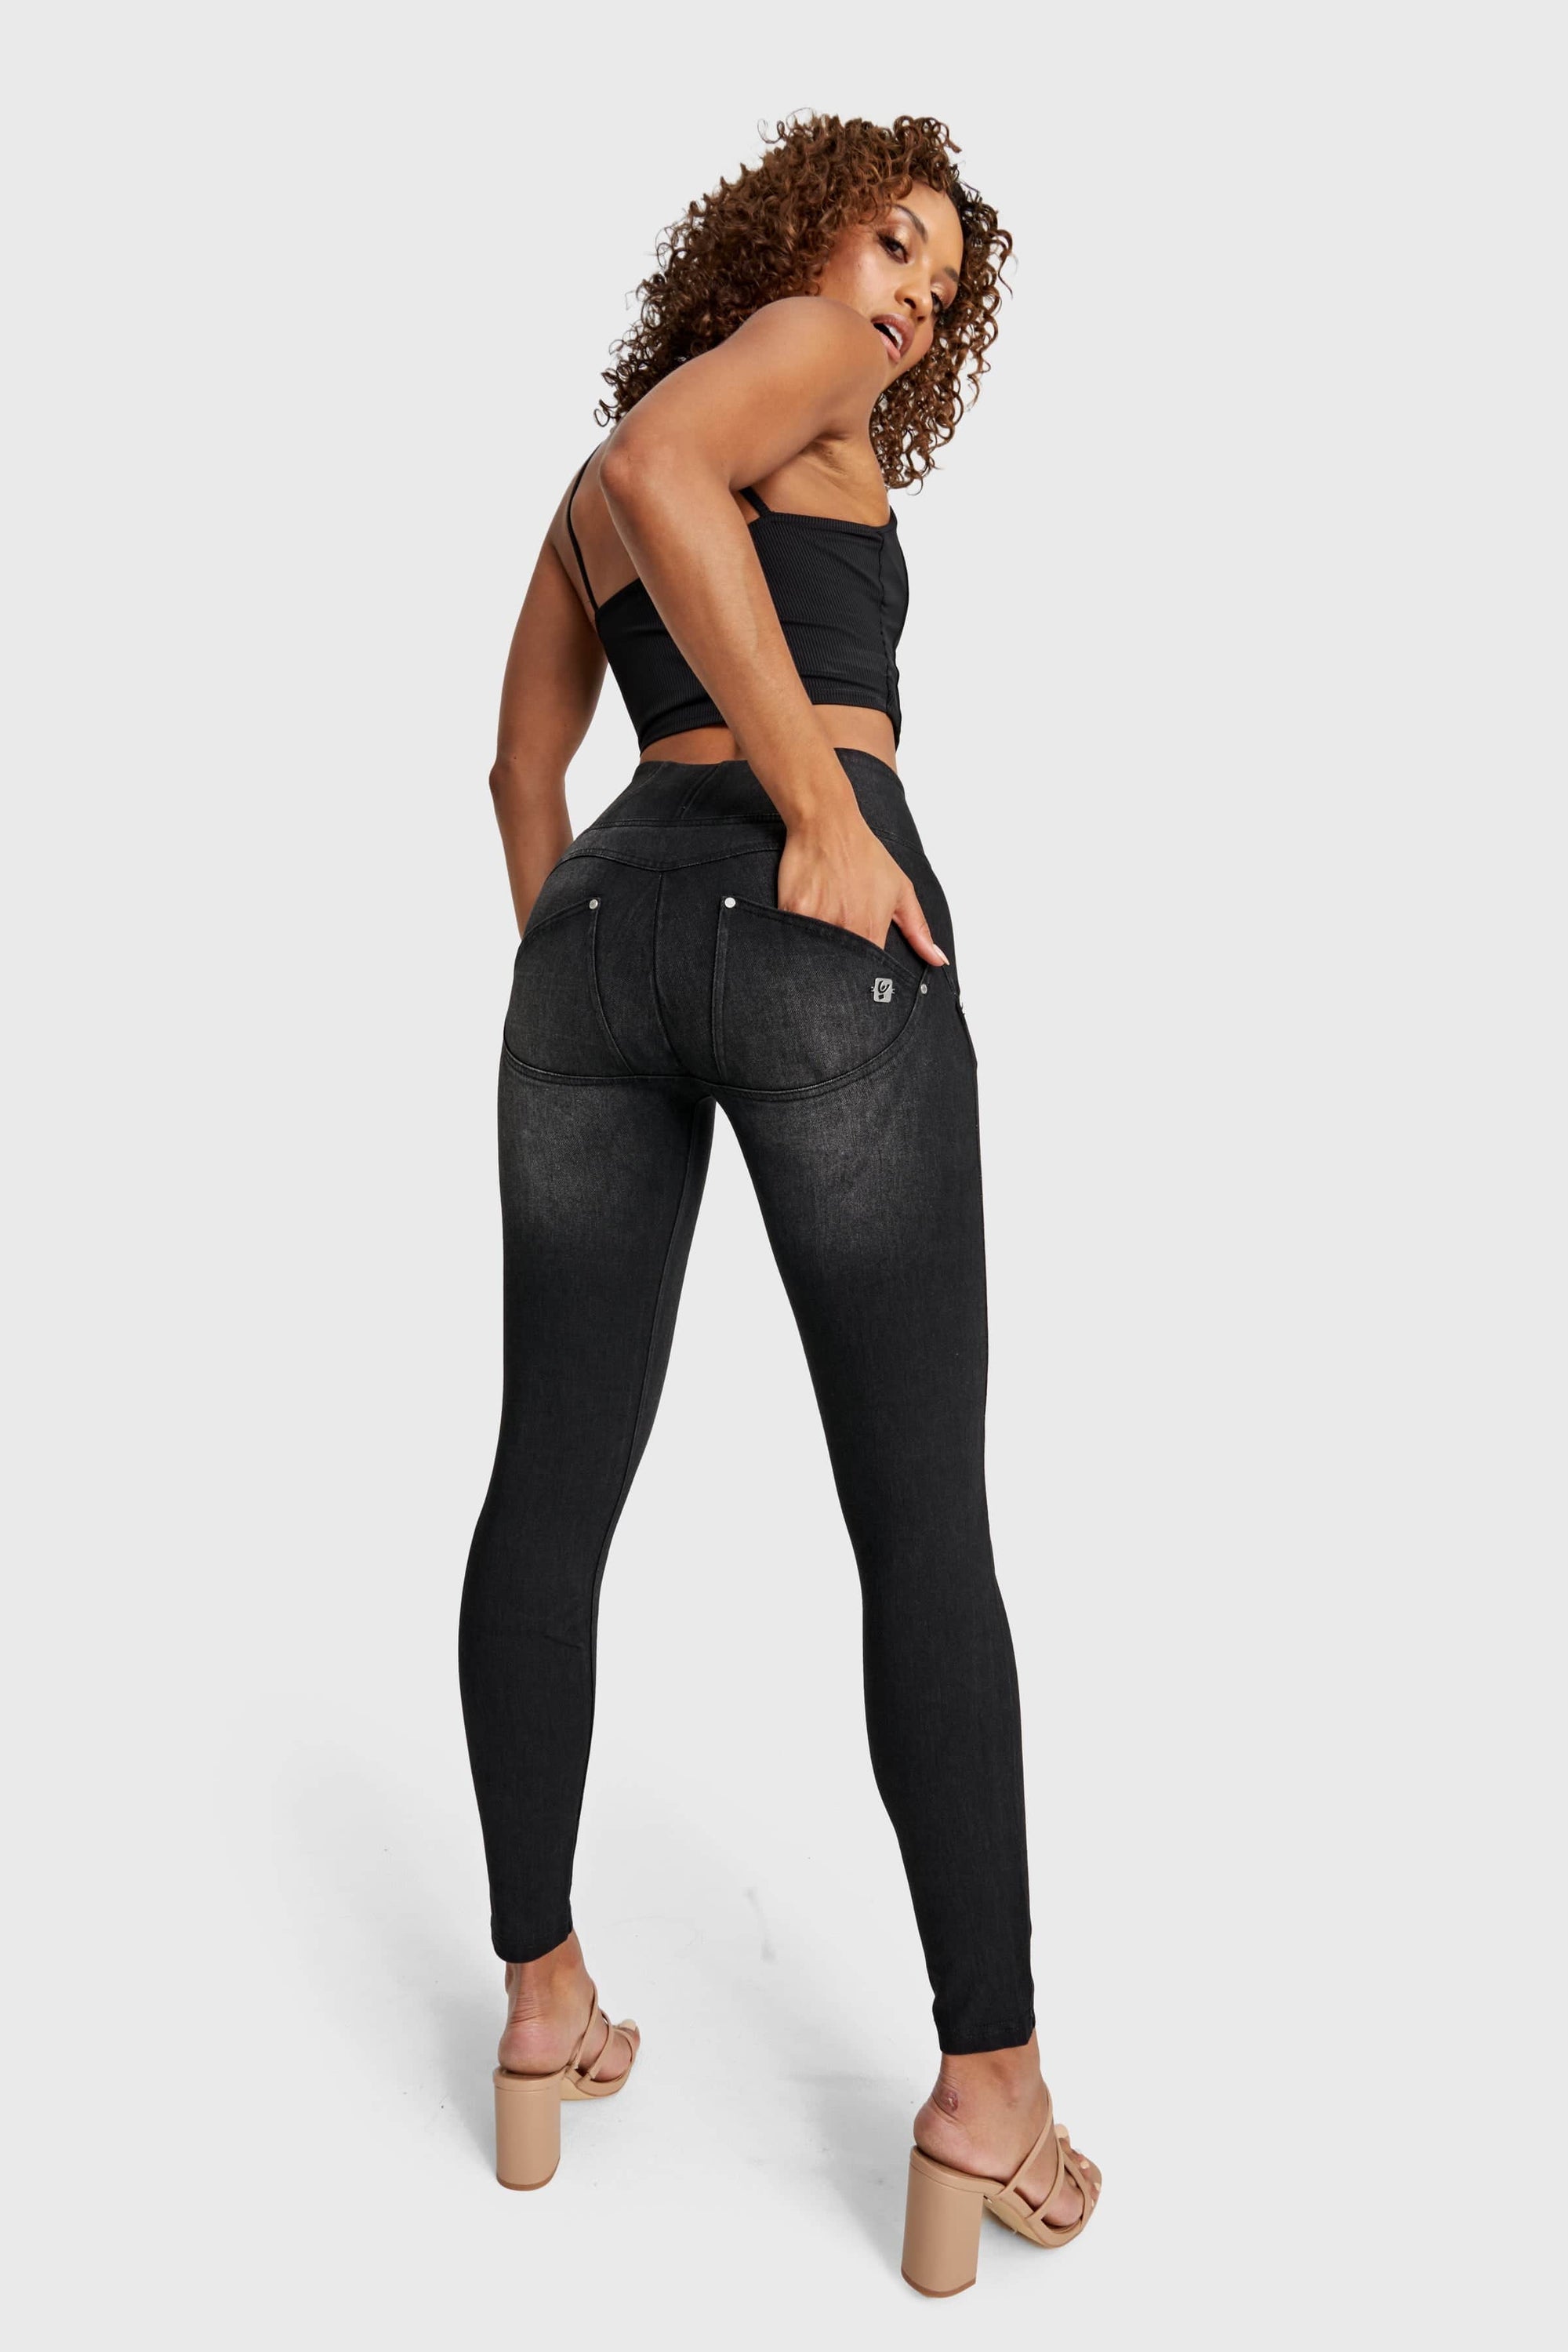 WR.UP® Snug Distressed Jeans - High Waisted - Full Length - Black + Black Stitching 5